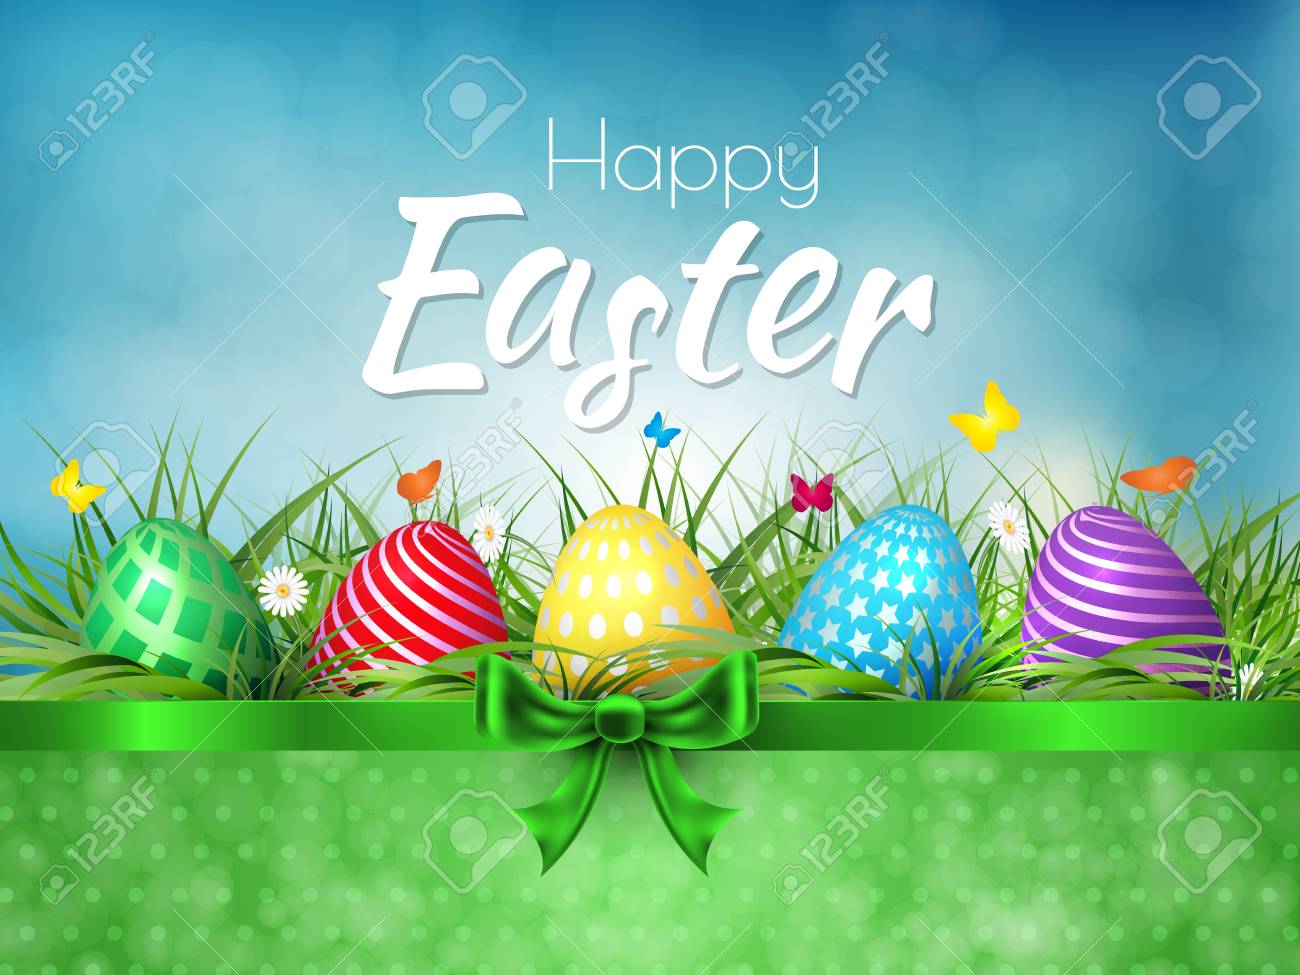 Happy Easter Background With Realistic Easter Eggs Easter Card